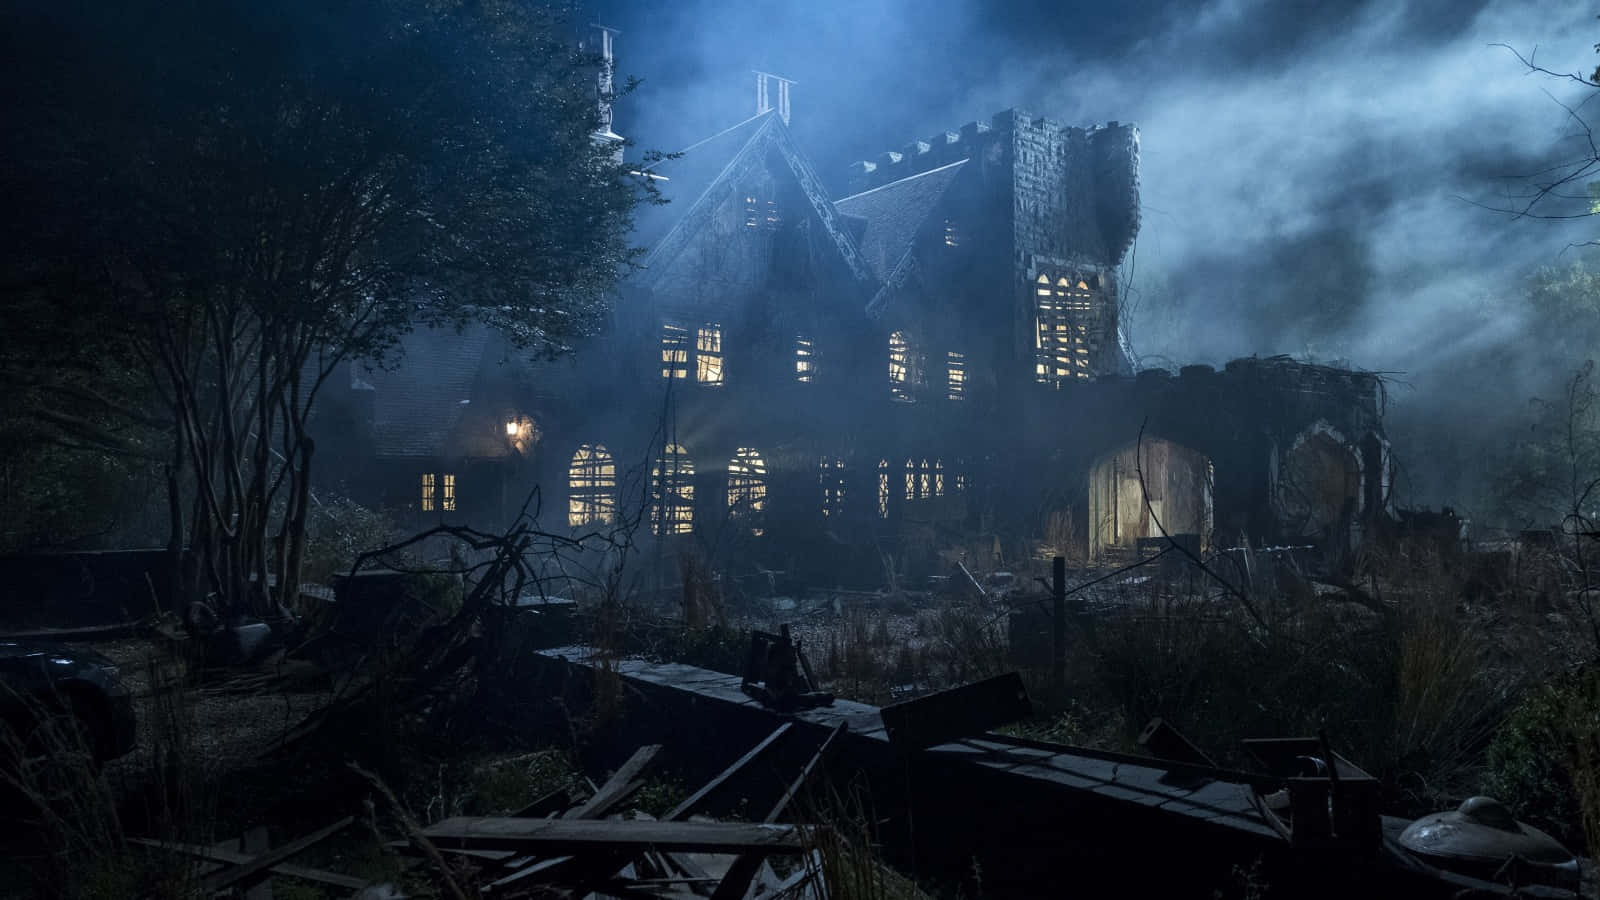 An Eerily Captivating Scene From Netflix's - The Haunting Of Bly Manor